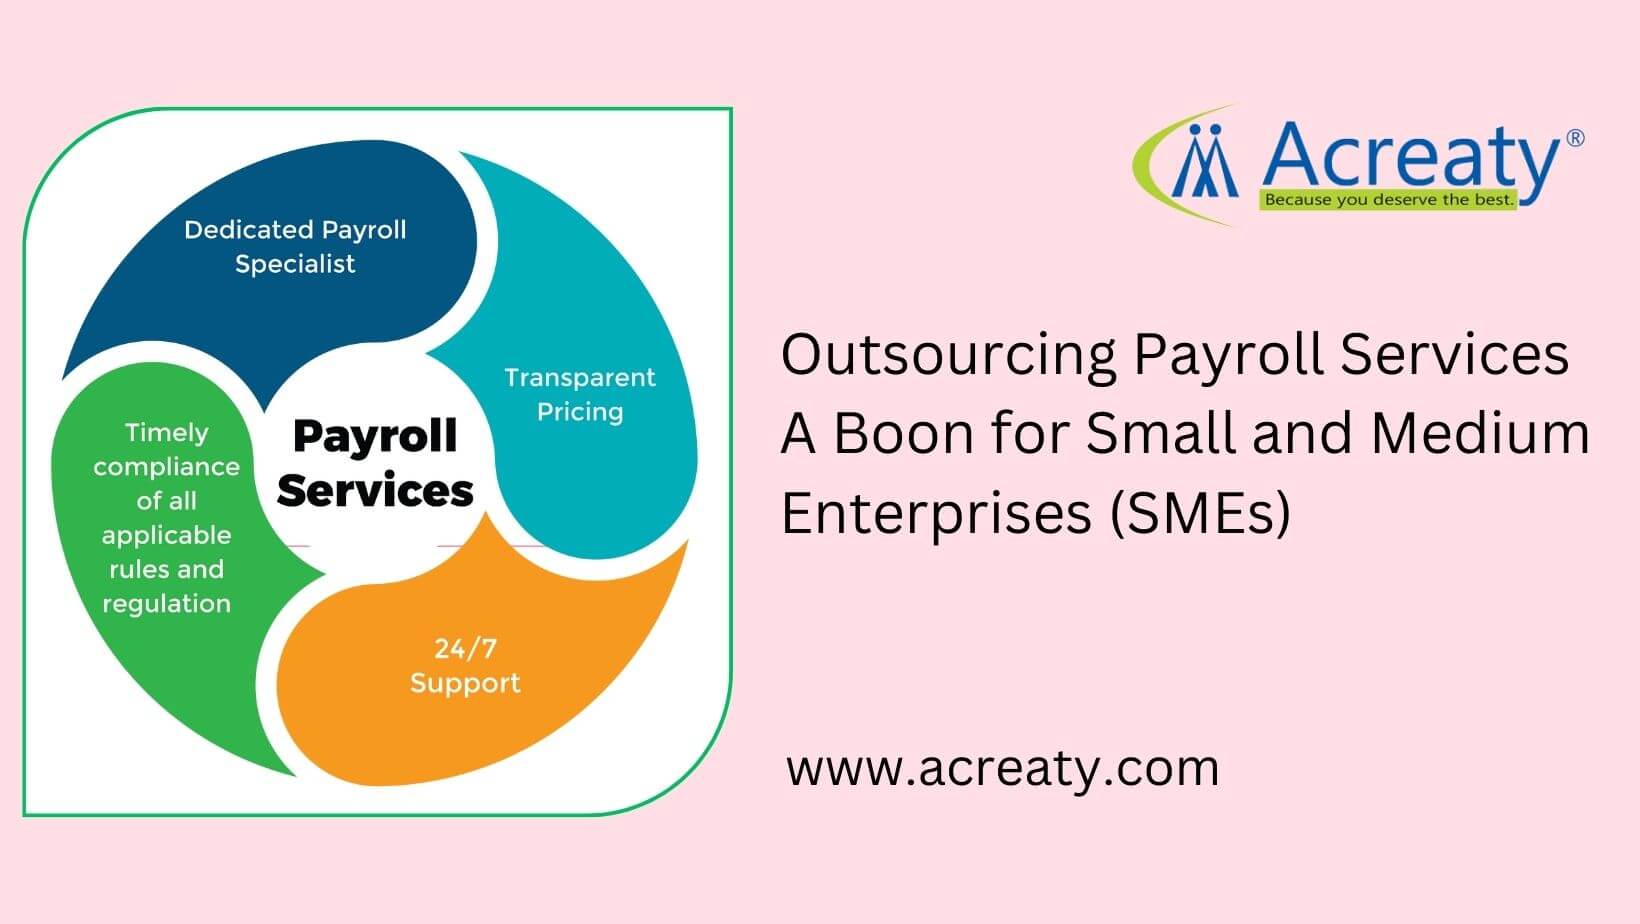 Outsourcing Payroll Services- A Boon for Small and Medium Enterprises (SMEs)